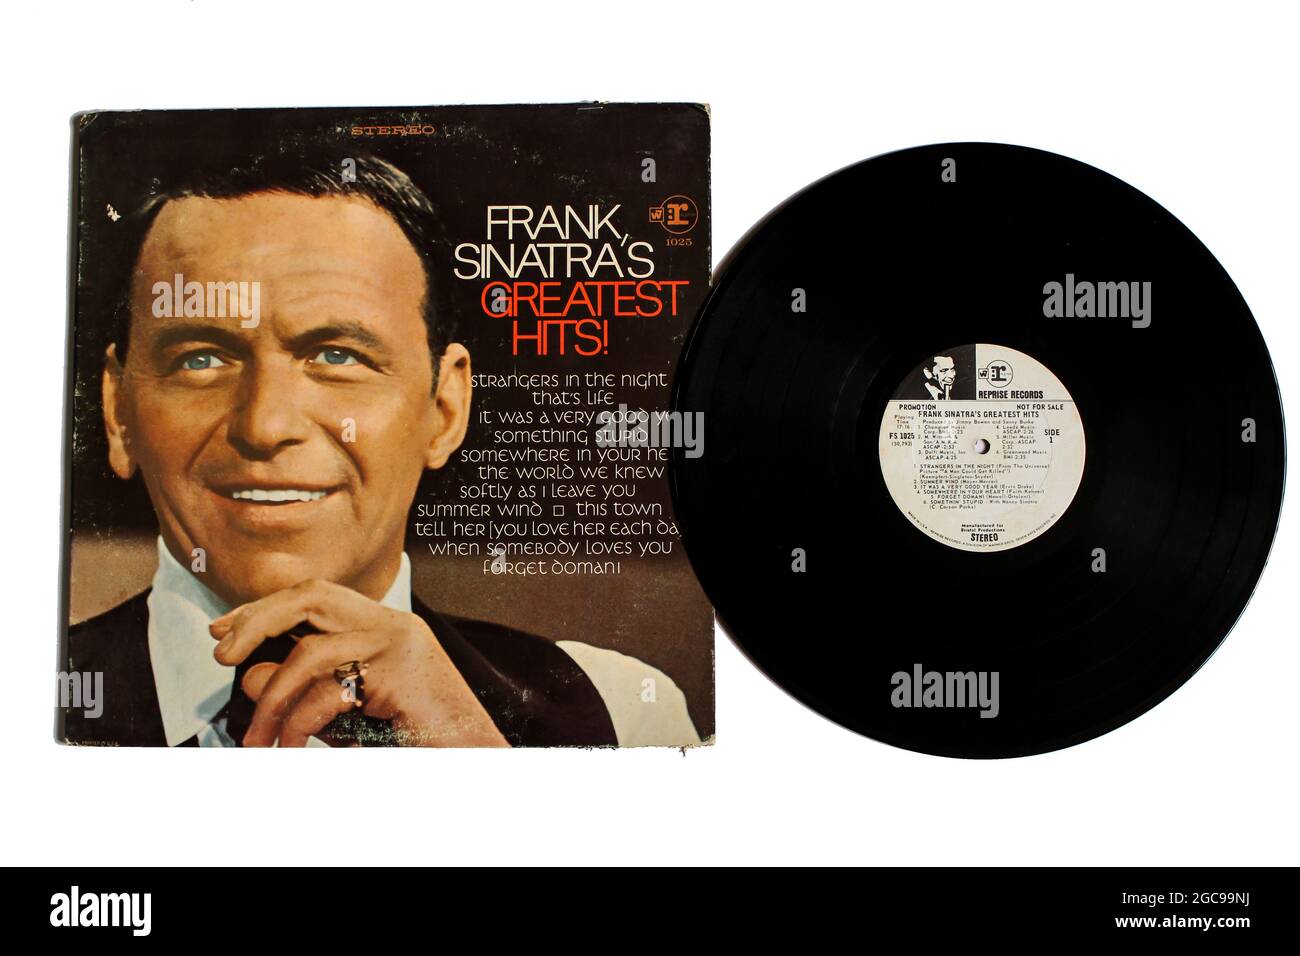 Jazz and easy listening musician, Frank Sinatra music album on vinyl record LP disc. Titled: Frank Sinatra's Greatest Hits album cover Stock Photo